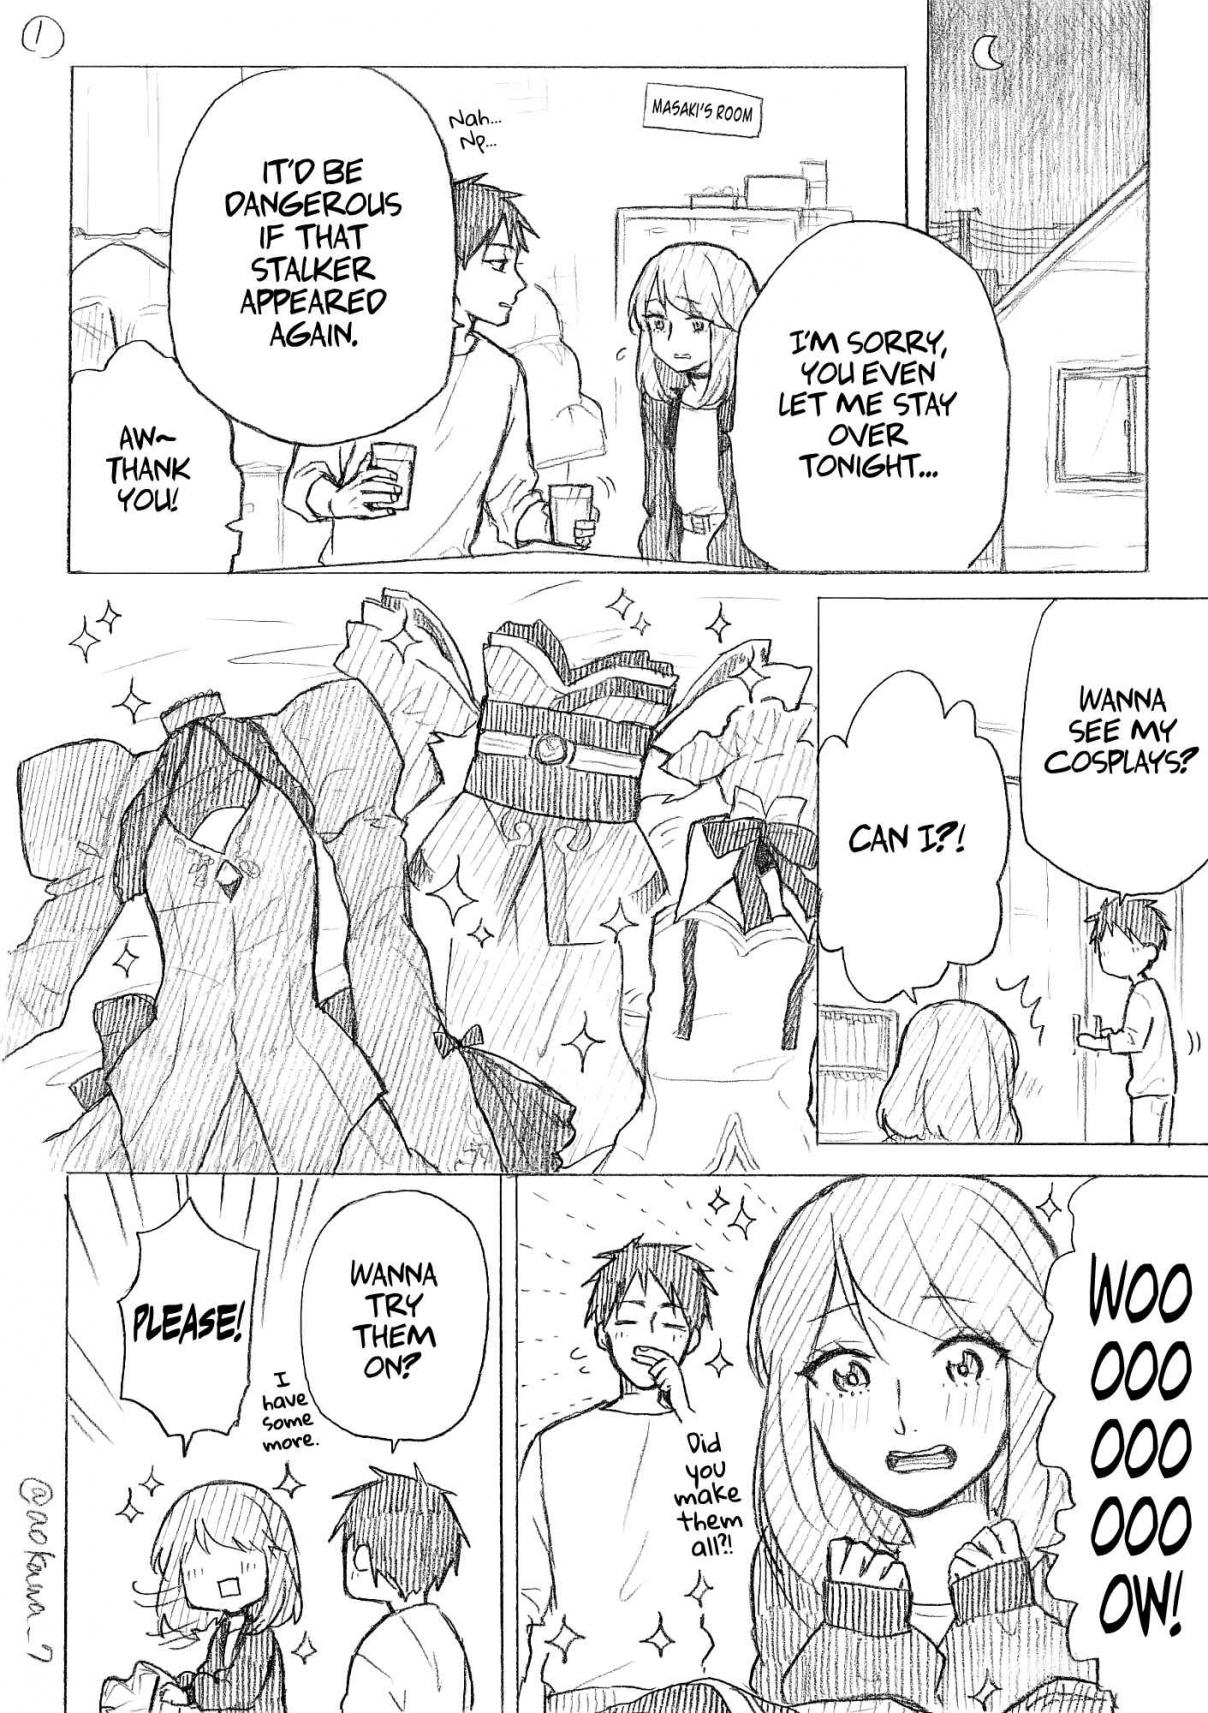 A Crossdressing Cosplayer Gets a Brother Ch. 6.3 Part 18